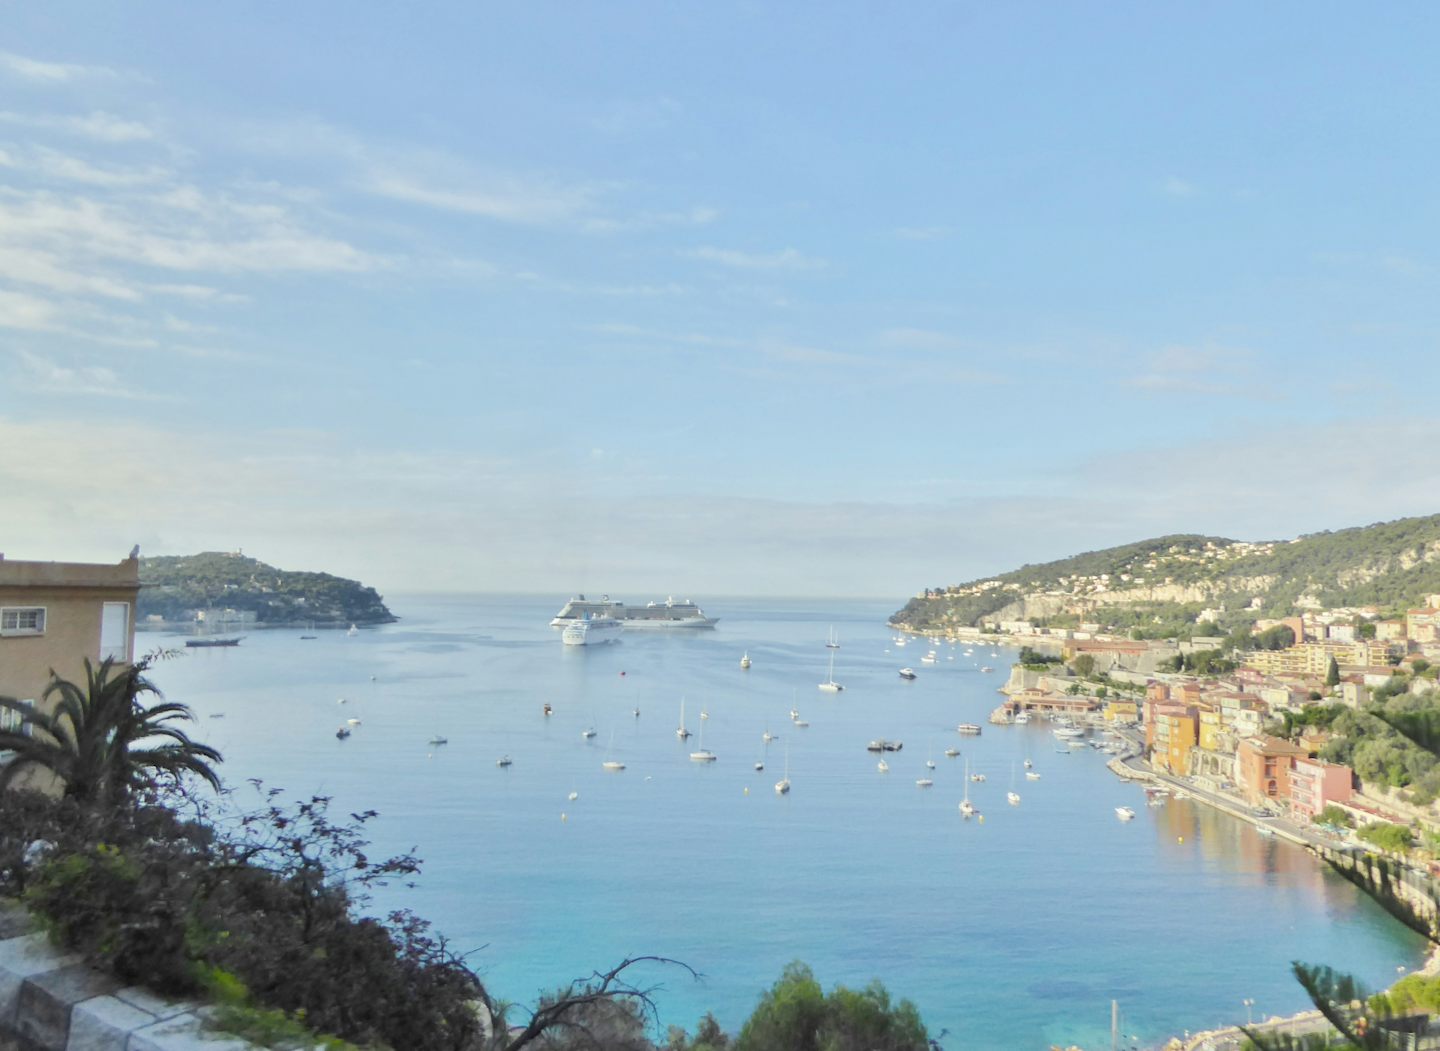 Ville Franche su Mare with "Equinox" in background